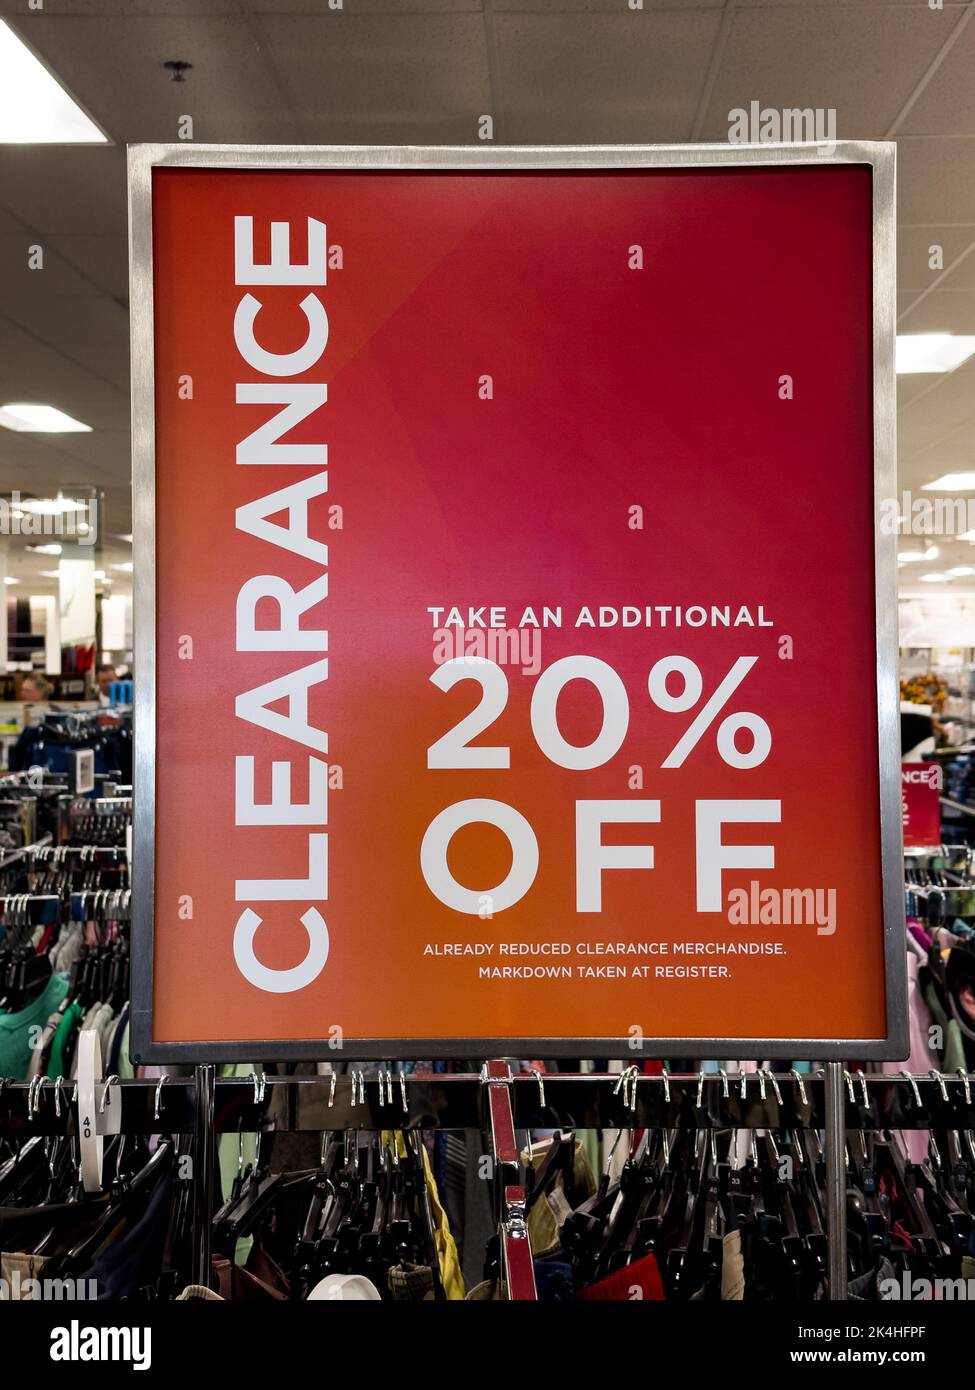 https://c8.alamy.com/comp/2K4HFPF/red-clearance-sale-sign-at-retail-store-2K4HFPF.jpg